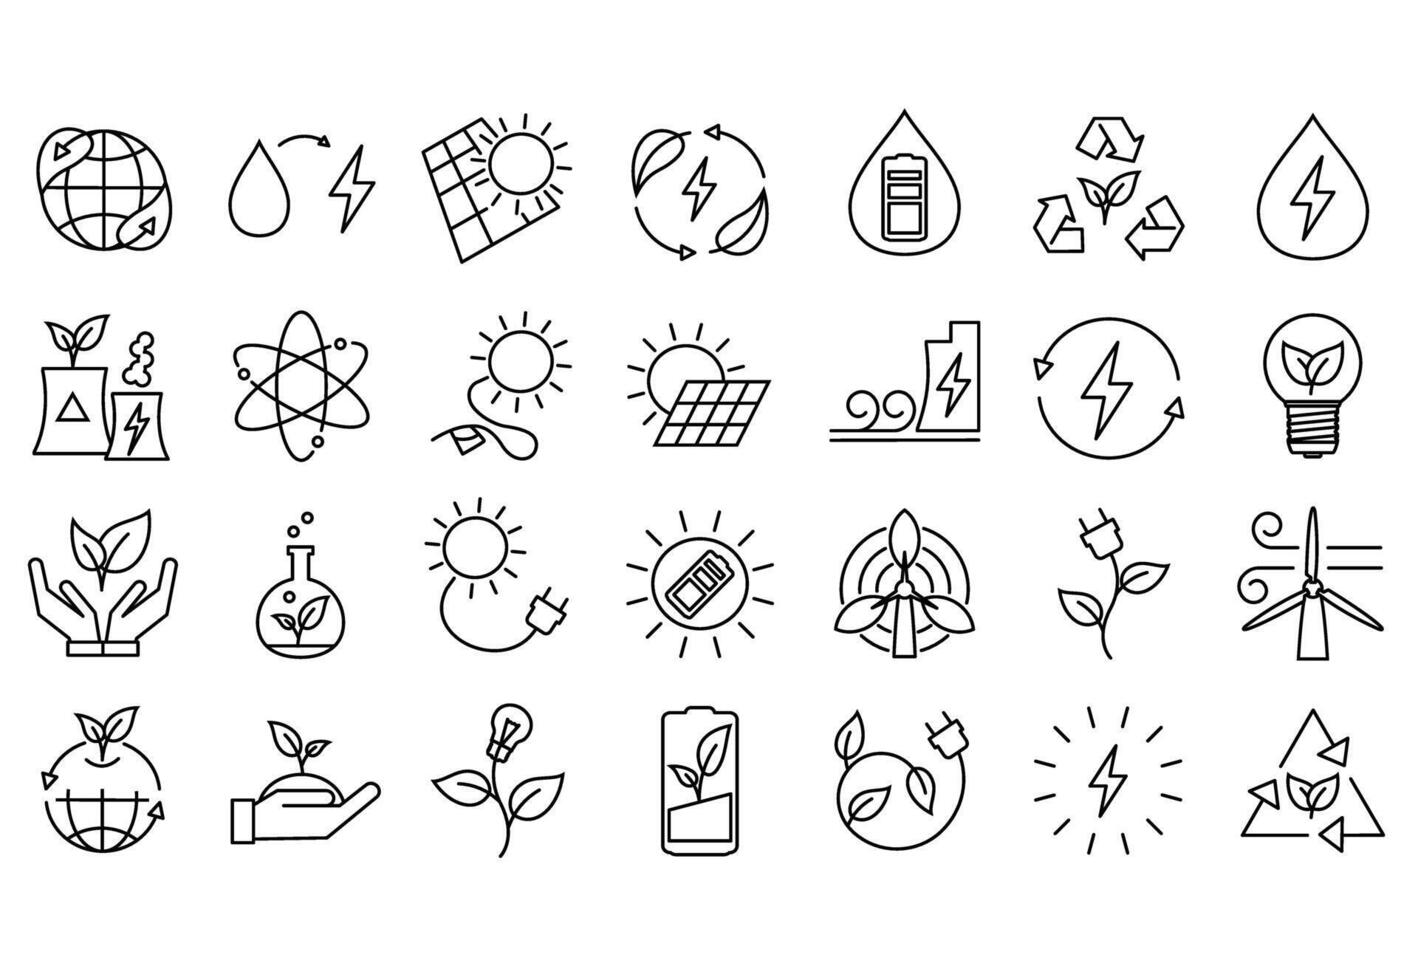 Ecology icons set. Eco friendly. Line minimalistic style. Collection of web icons such as recycling, alternative energy source, eco house vector